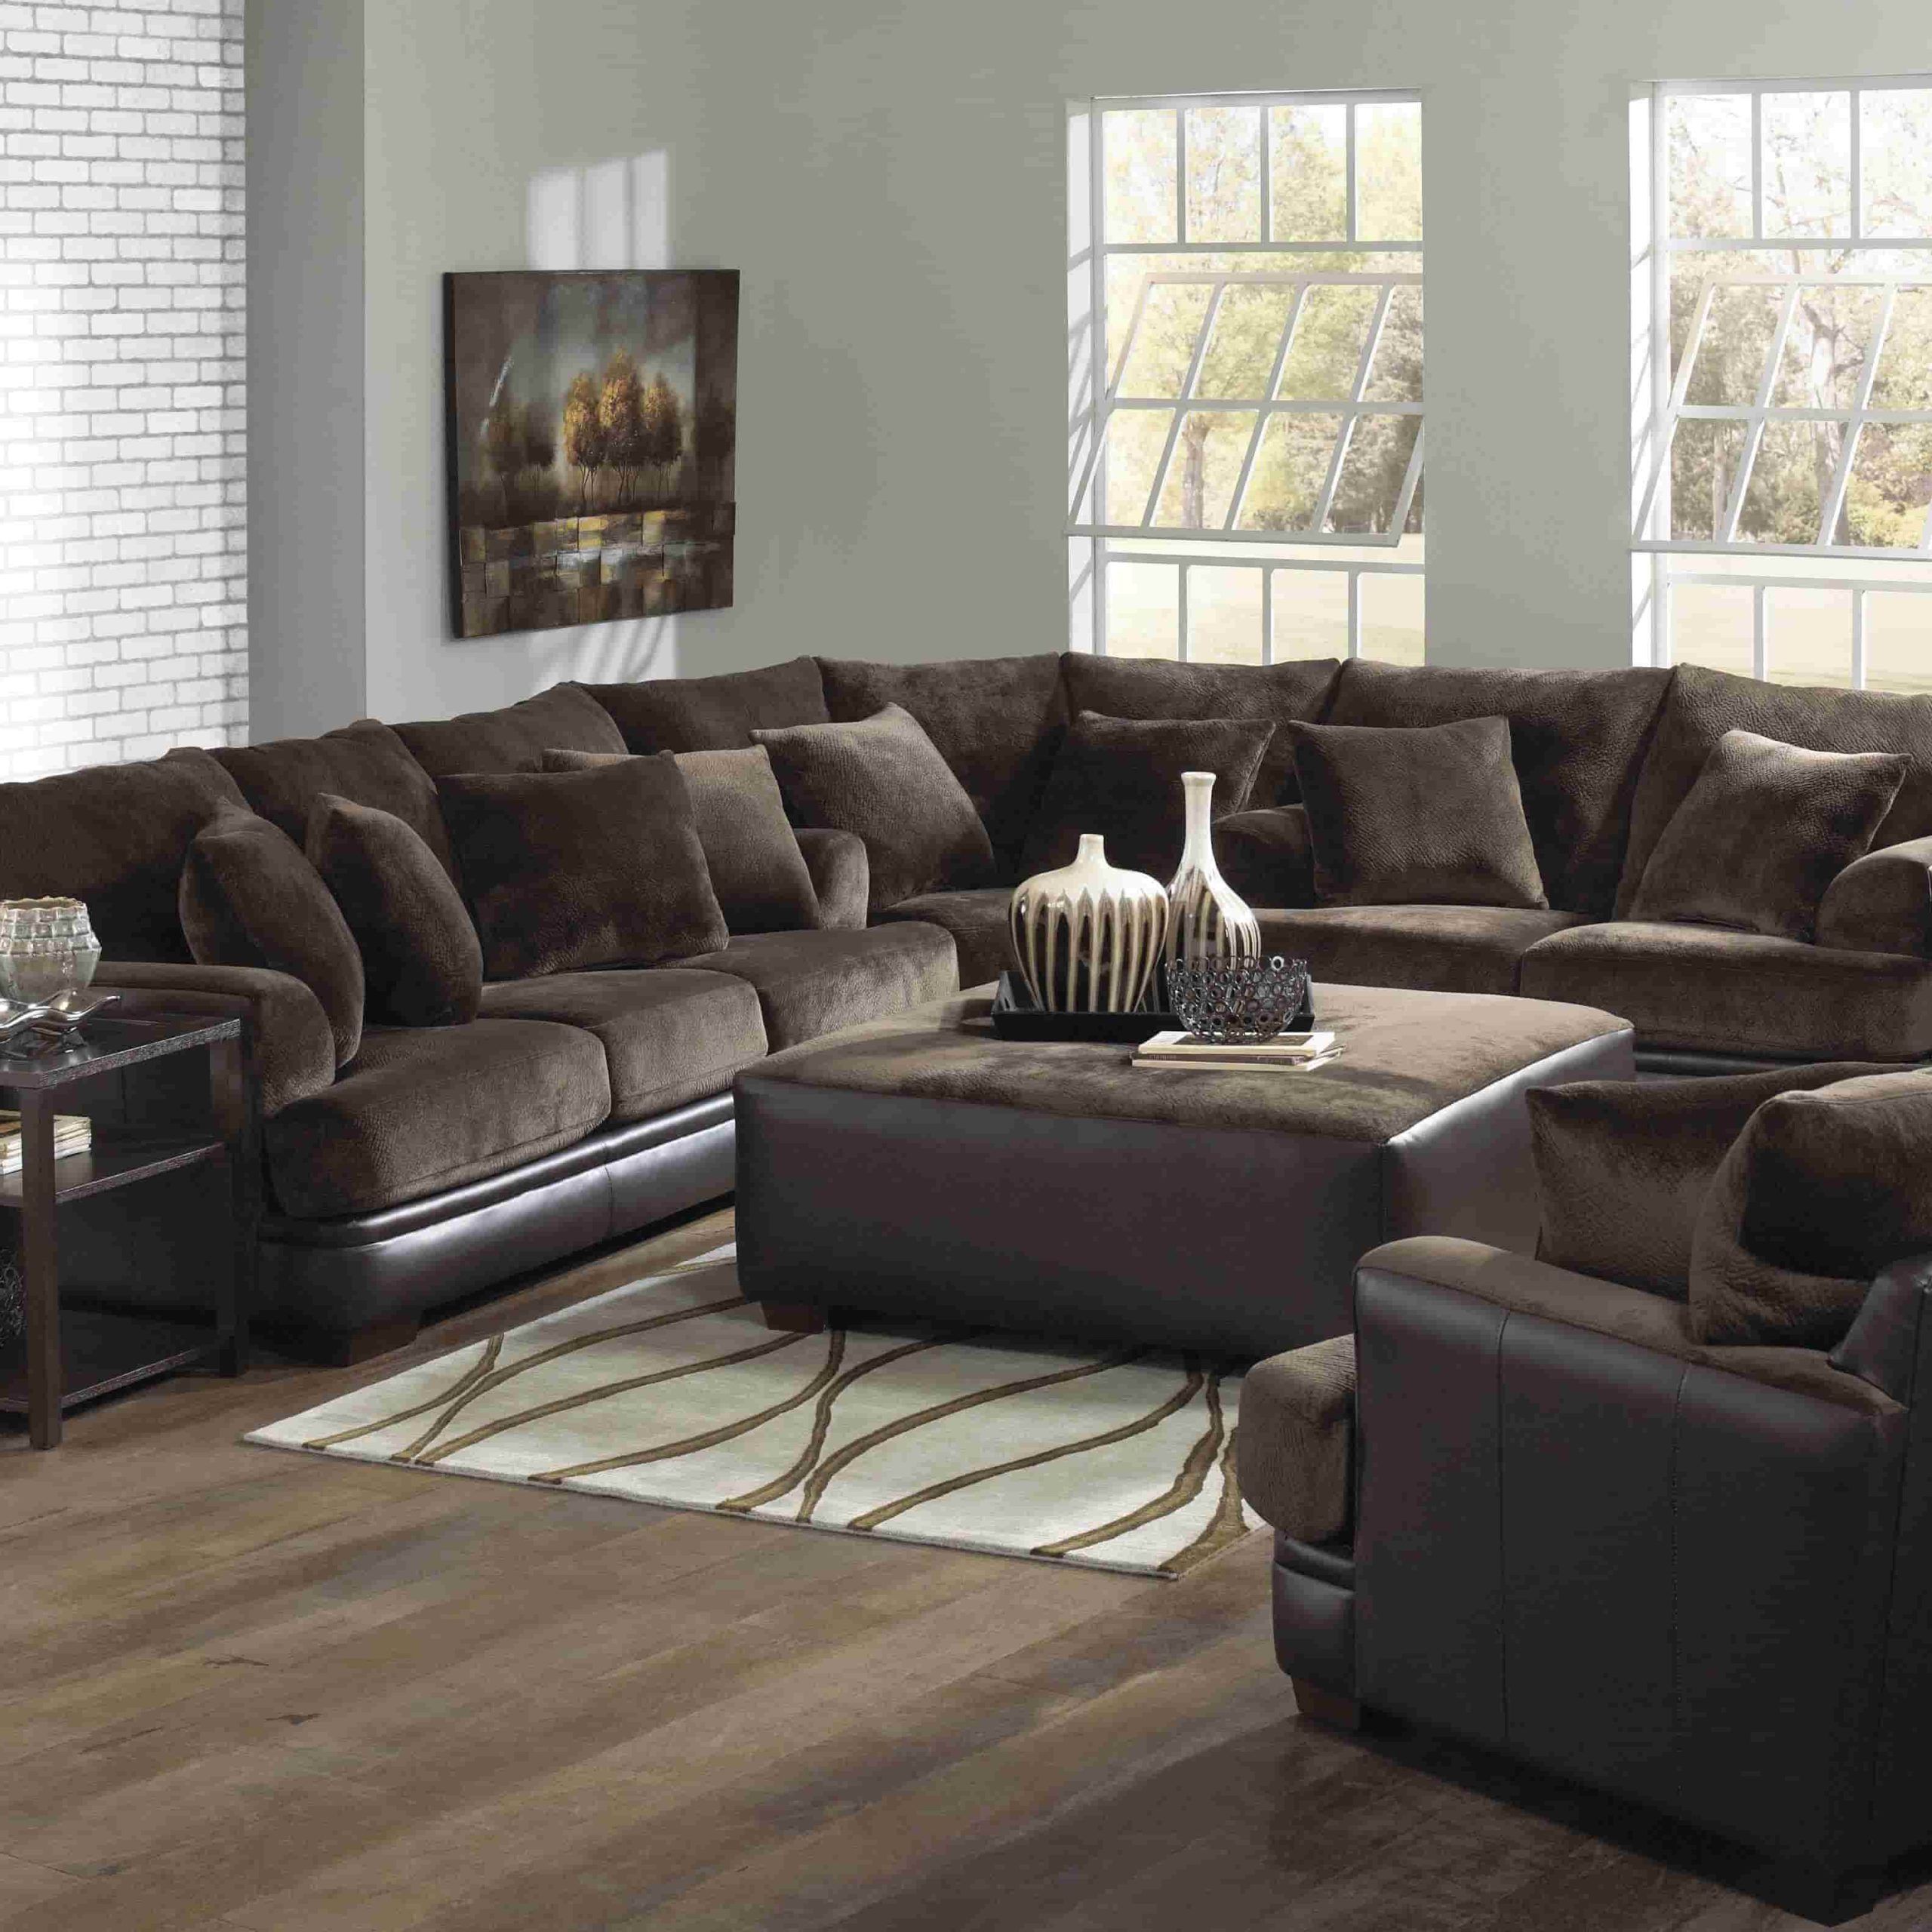 Living Room Decor With Dark Brown Couch – Inspiring Ideas Throughout Sofas In Chocolate Brown (View 16 of 20)